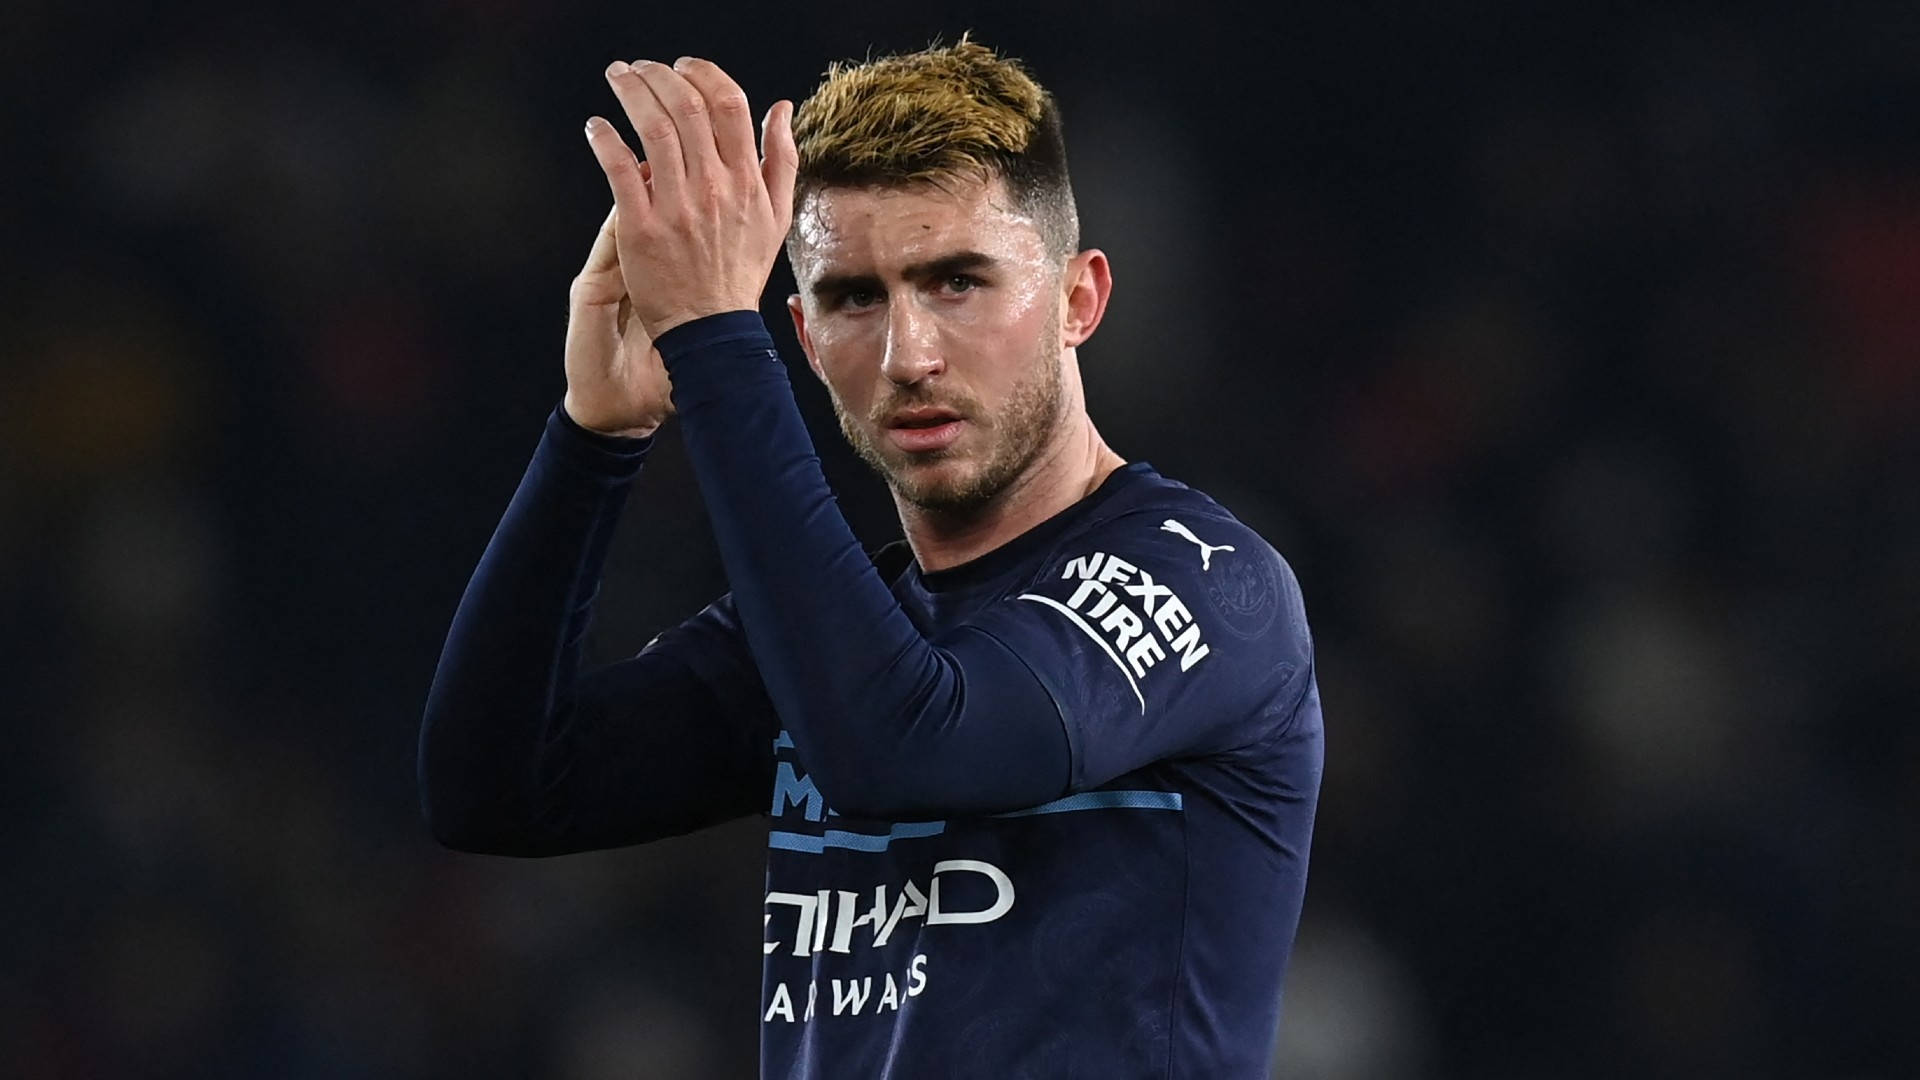 Aymeric Laporte With Hands Up Wallpaper